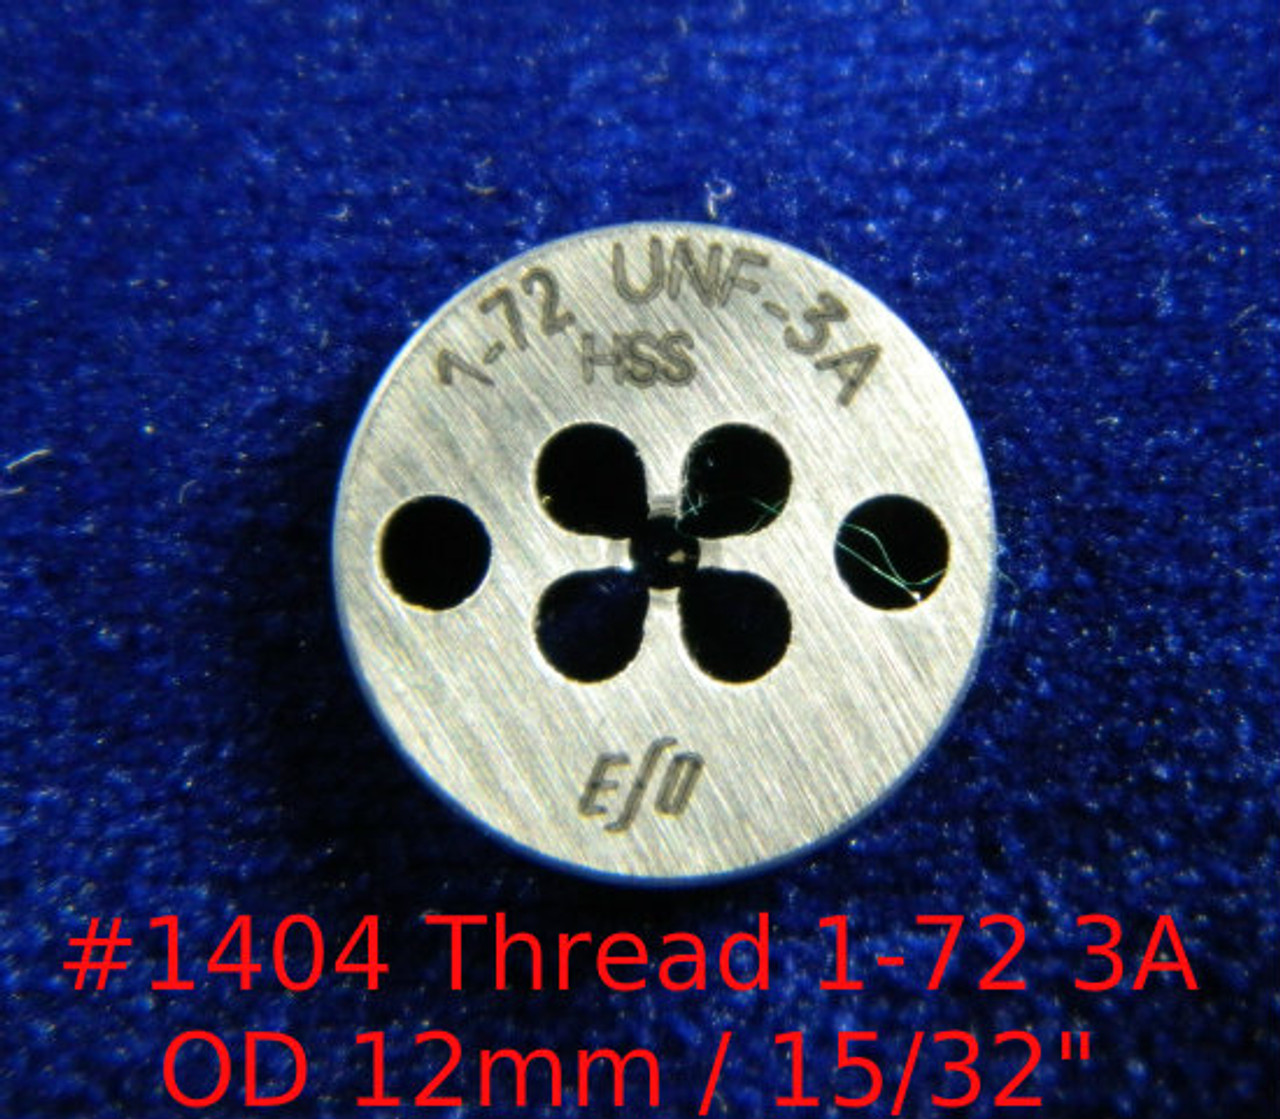 Thread 1-72 UNF-3A; Precision Thread die for threading round stock diameter of die is 12mm / 15/32".  Made of High speed Steel then hardened made in Switzerland.